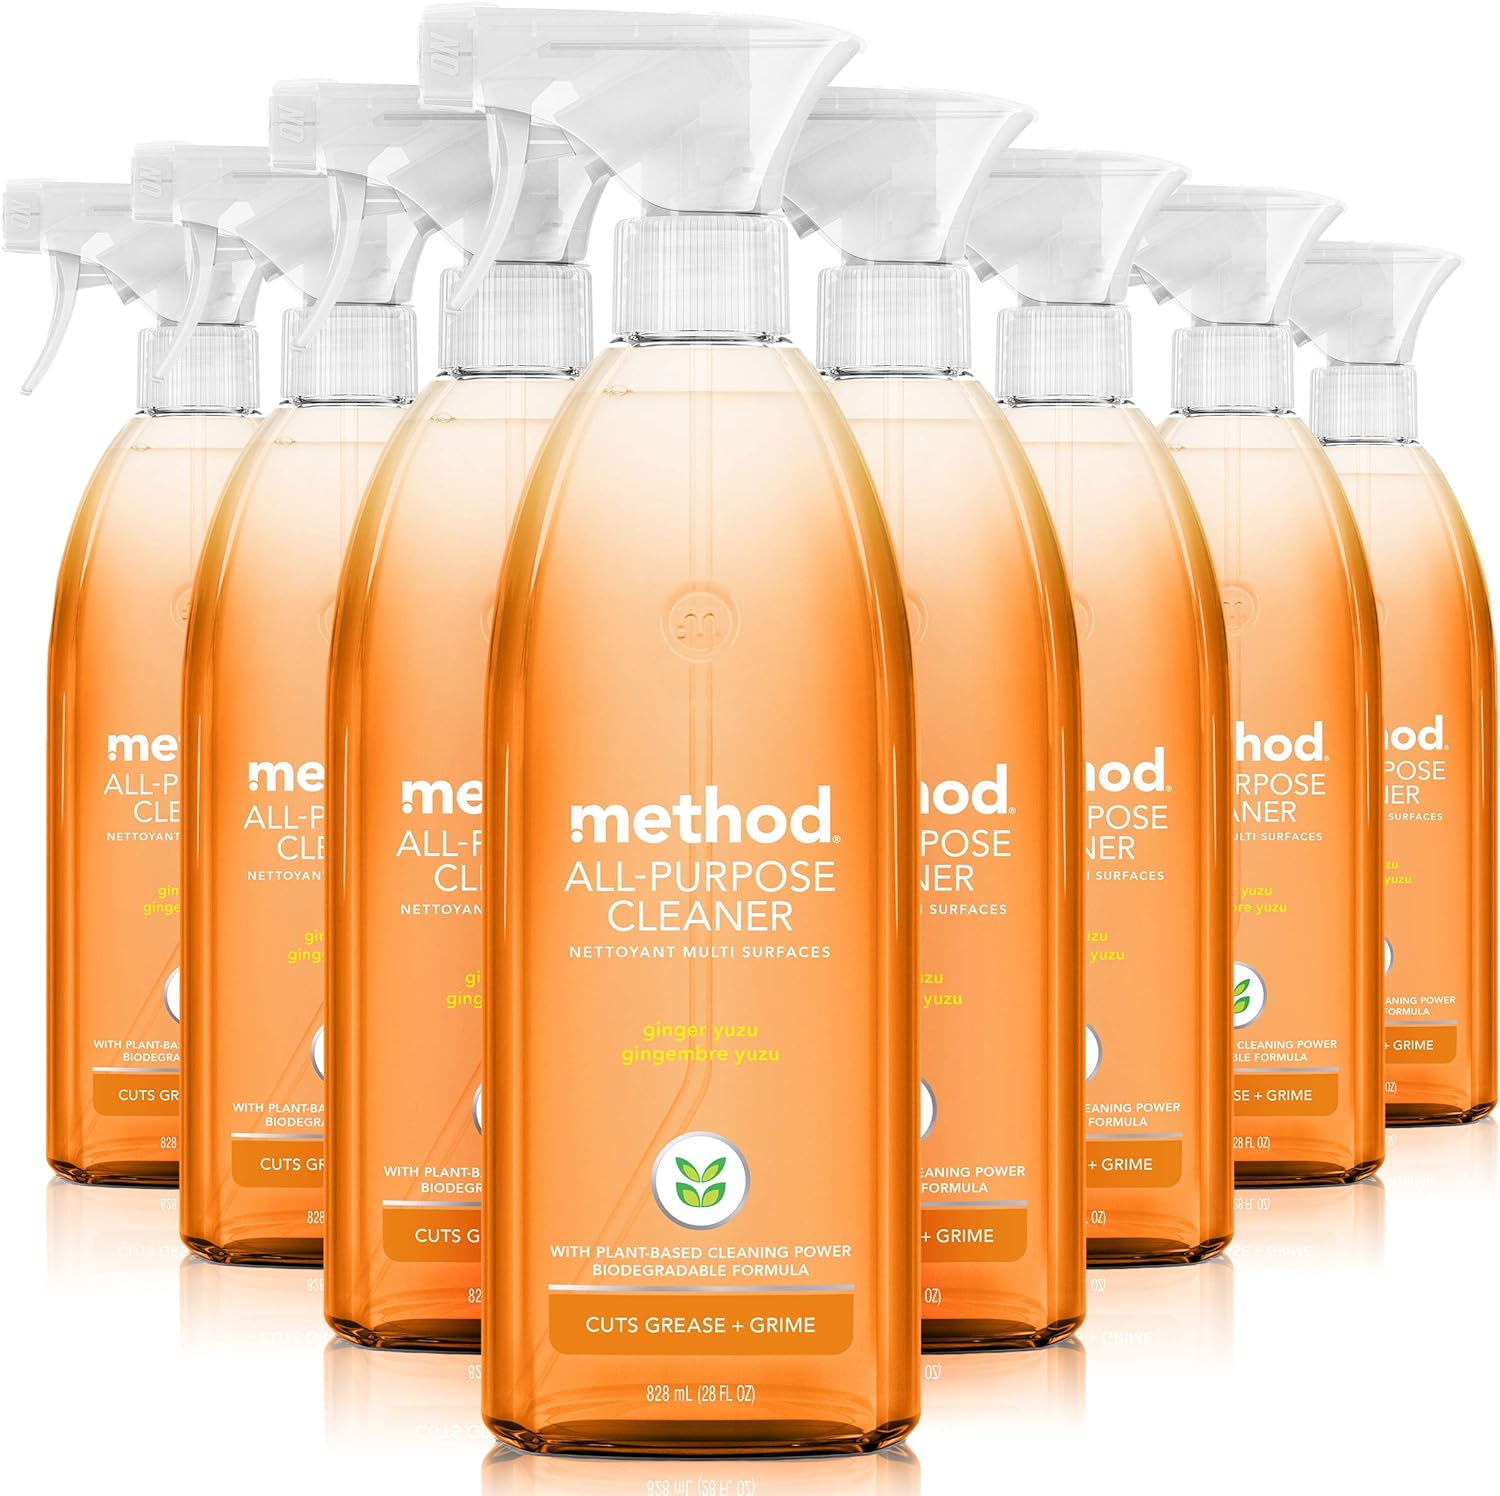 Method All-Purpose Cleaner Spray, Ginger Yuzu, Plant-Based and Biodegradable Formula Perfect for Most Counters, Tiles, Stone, and More, 28 oz Spray Bottle, (Pack of 1)